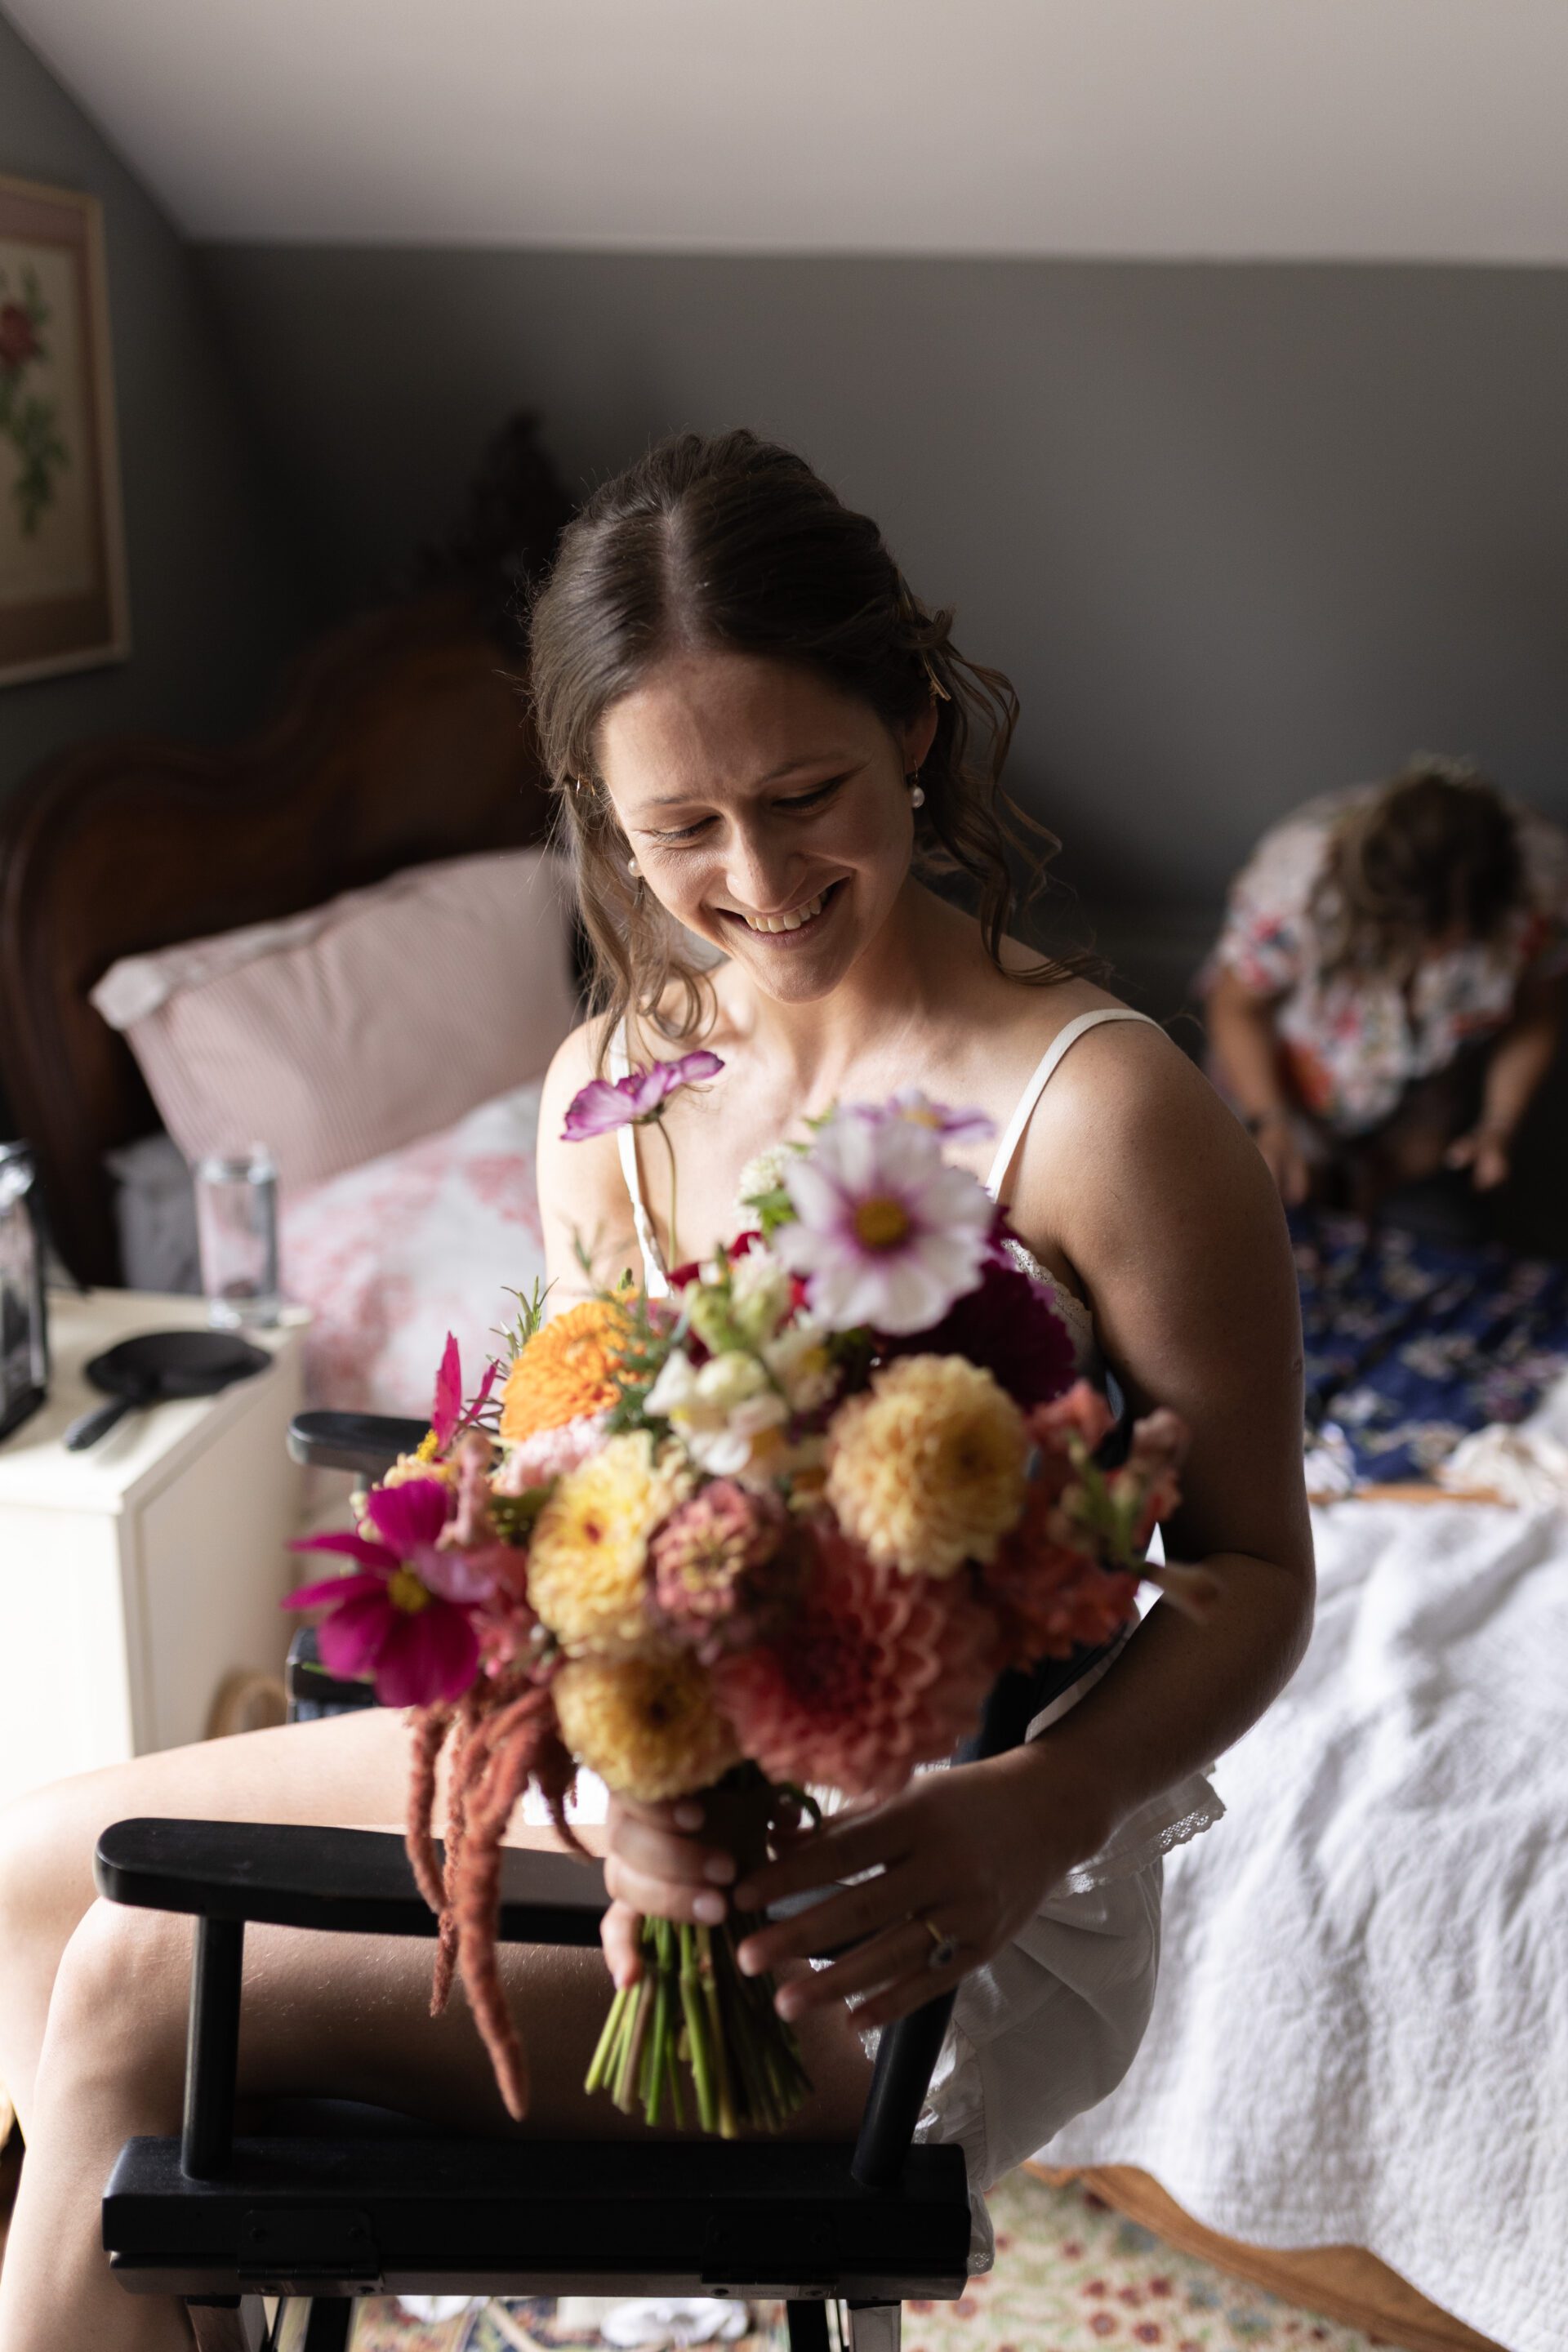 The bride inspects her beautiful bouquet